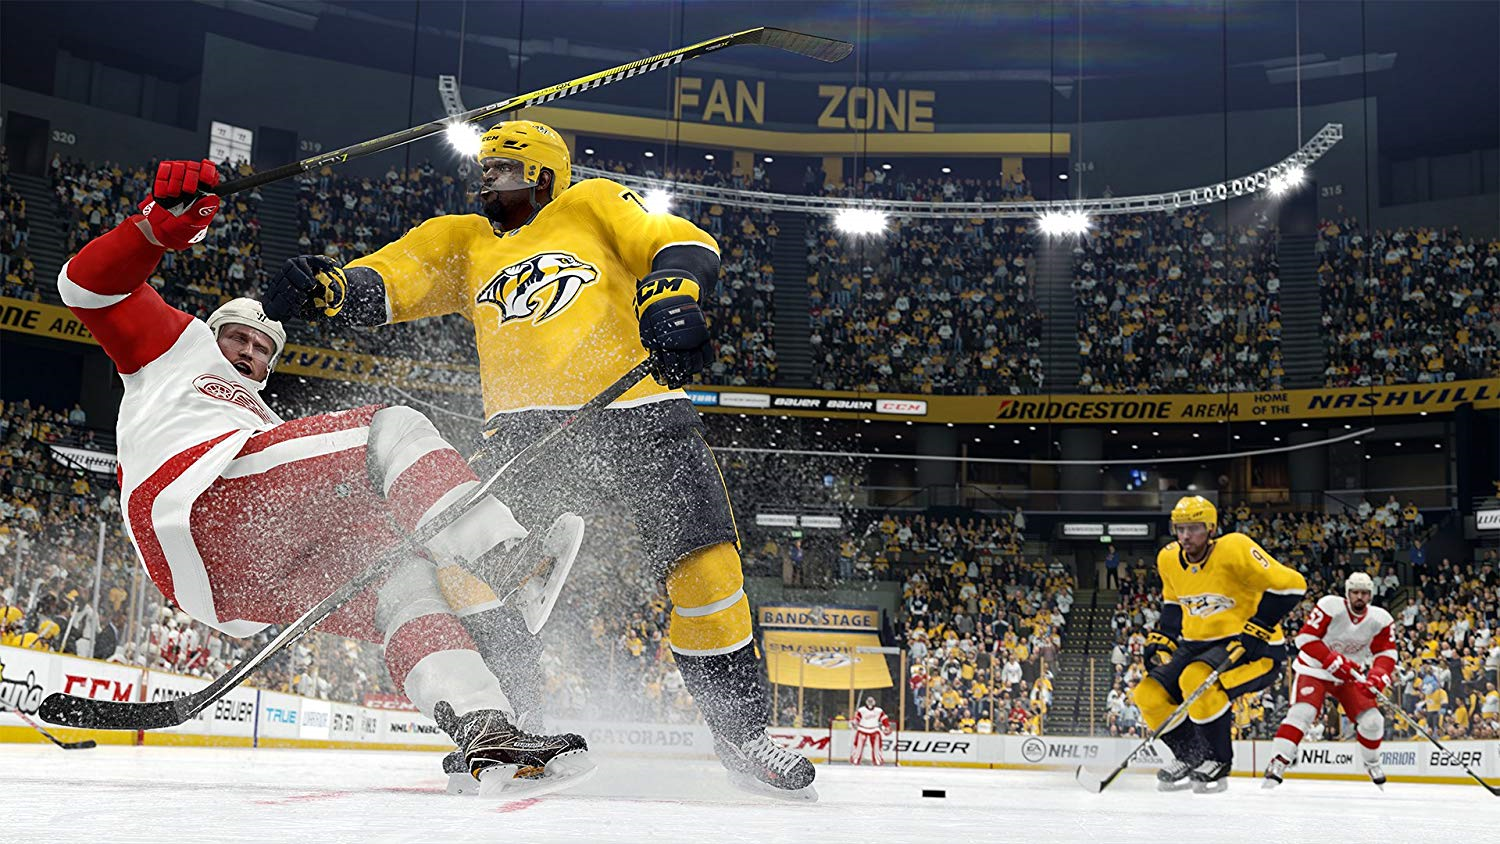 download nhl 2021 ps4